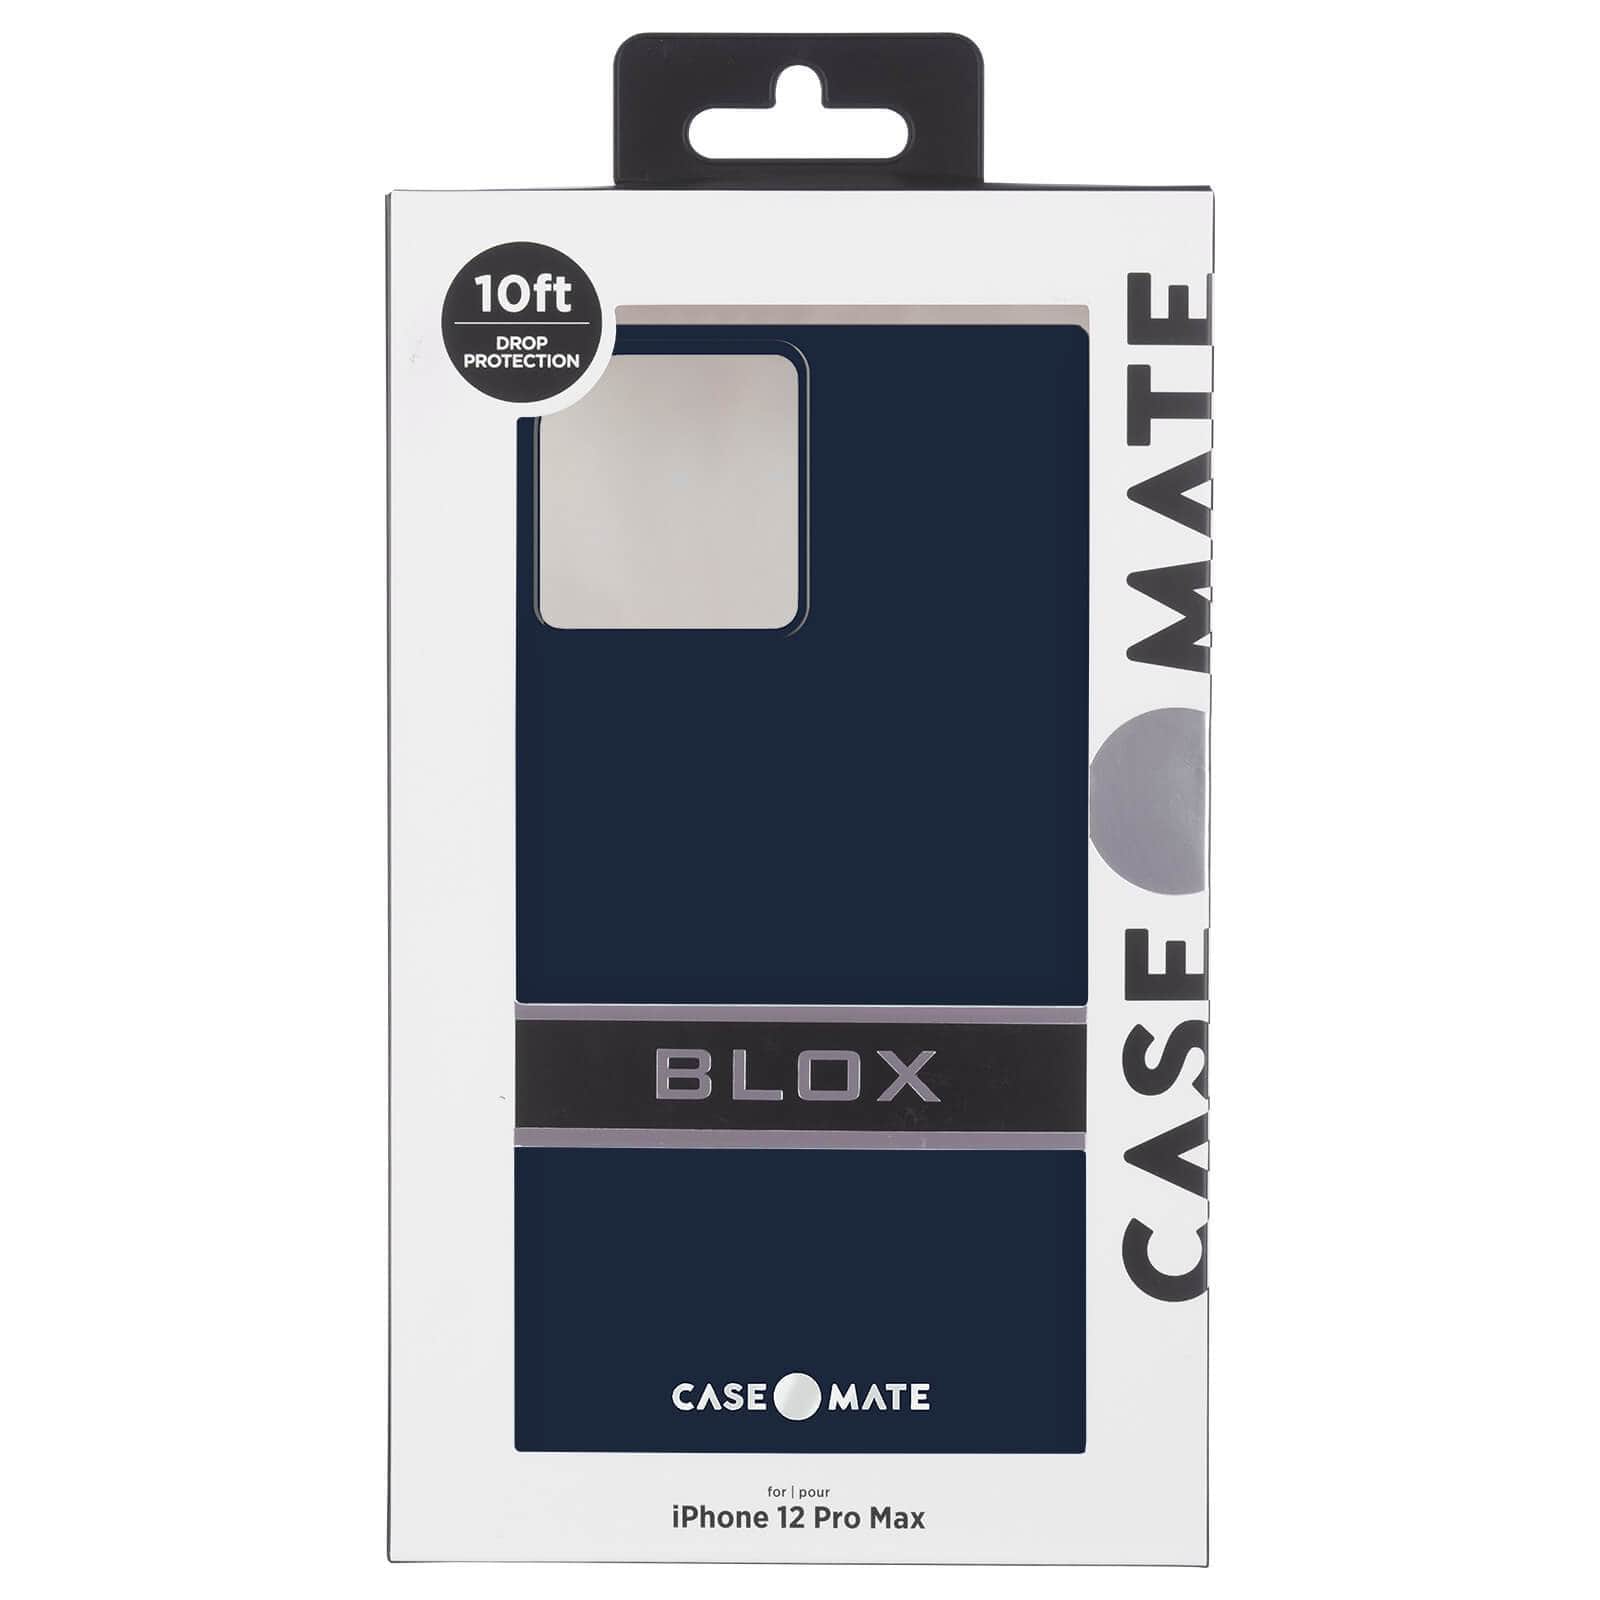 BLOX packaging. 10 ft Drop Protection. Case-Mate BLOX for iPhone 12 Pro Max. color::Navy